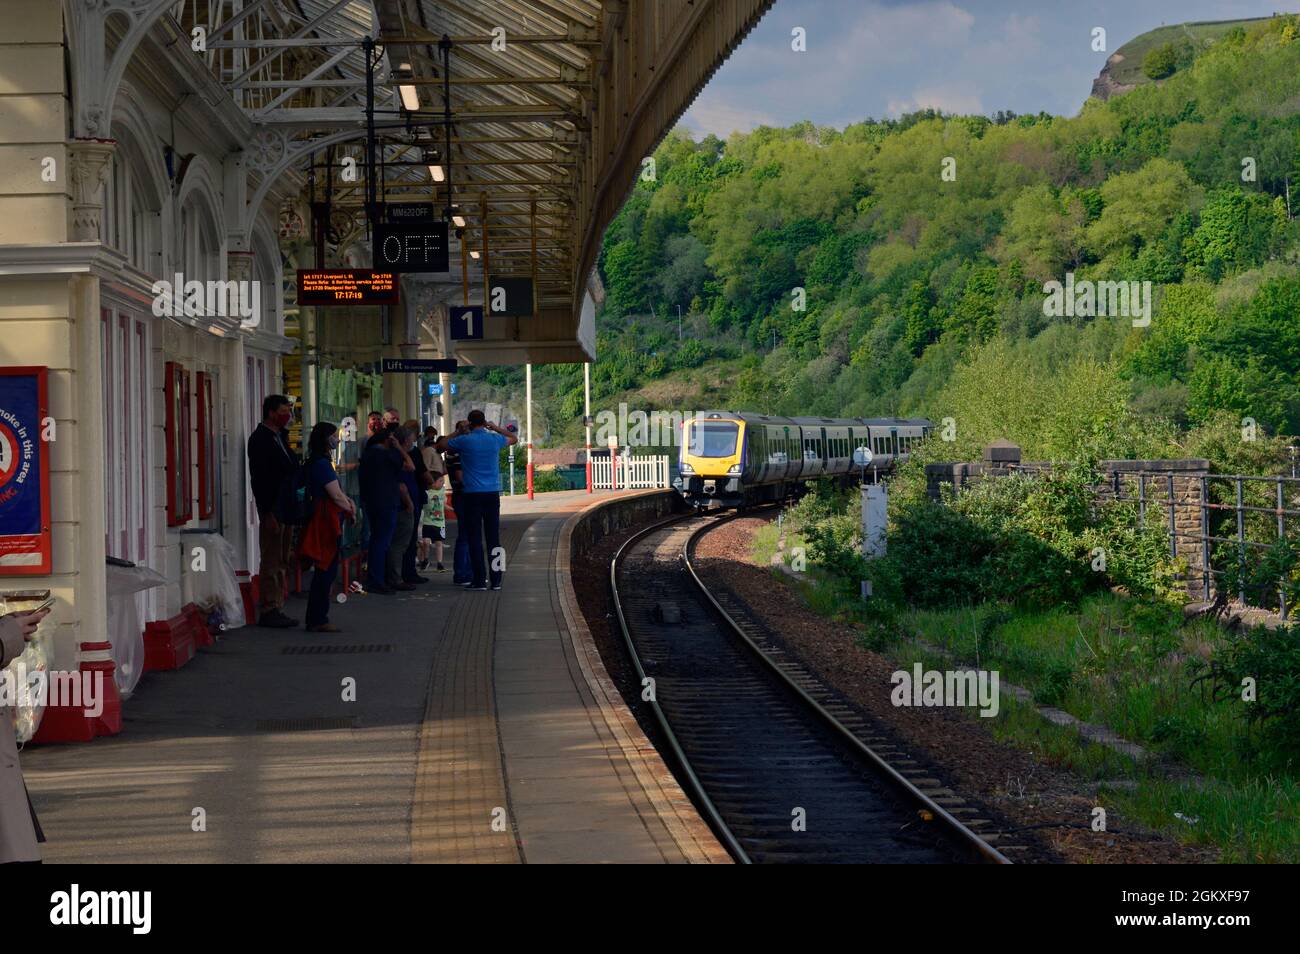 HALIFAX. WEST YORKSHIRE. ENGLAND. 05-29-21. The railway station. Northern Rail DMU 195120 approaches with the 17.17 train to Liverpool Lime Street. Stock Photo